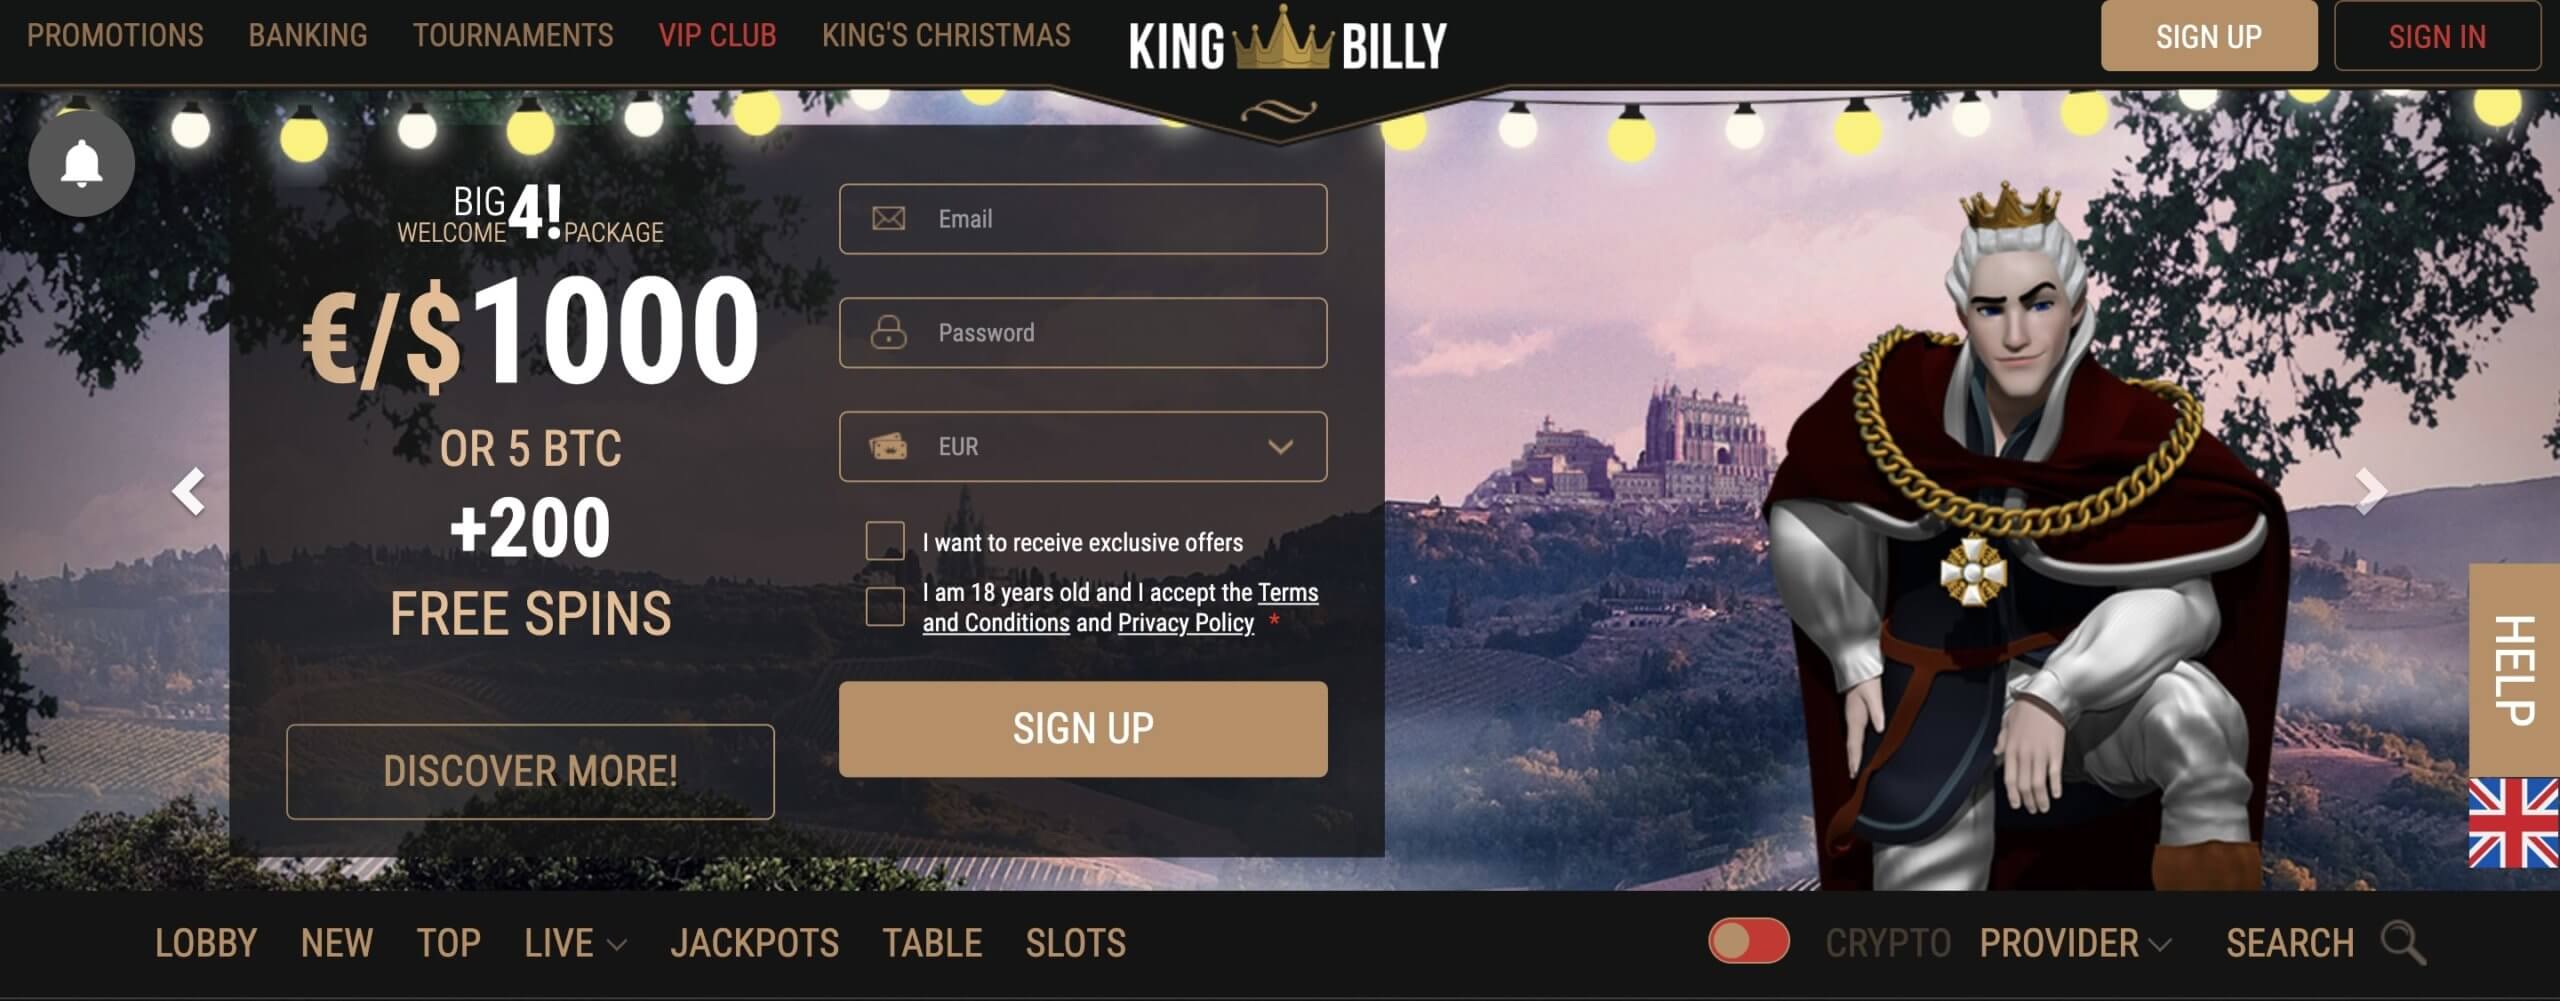 King Billy Casino Philippines Review